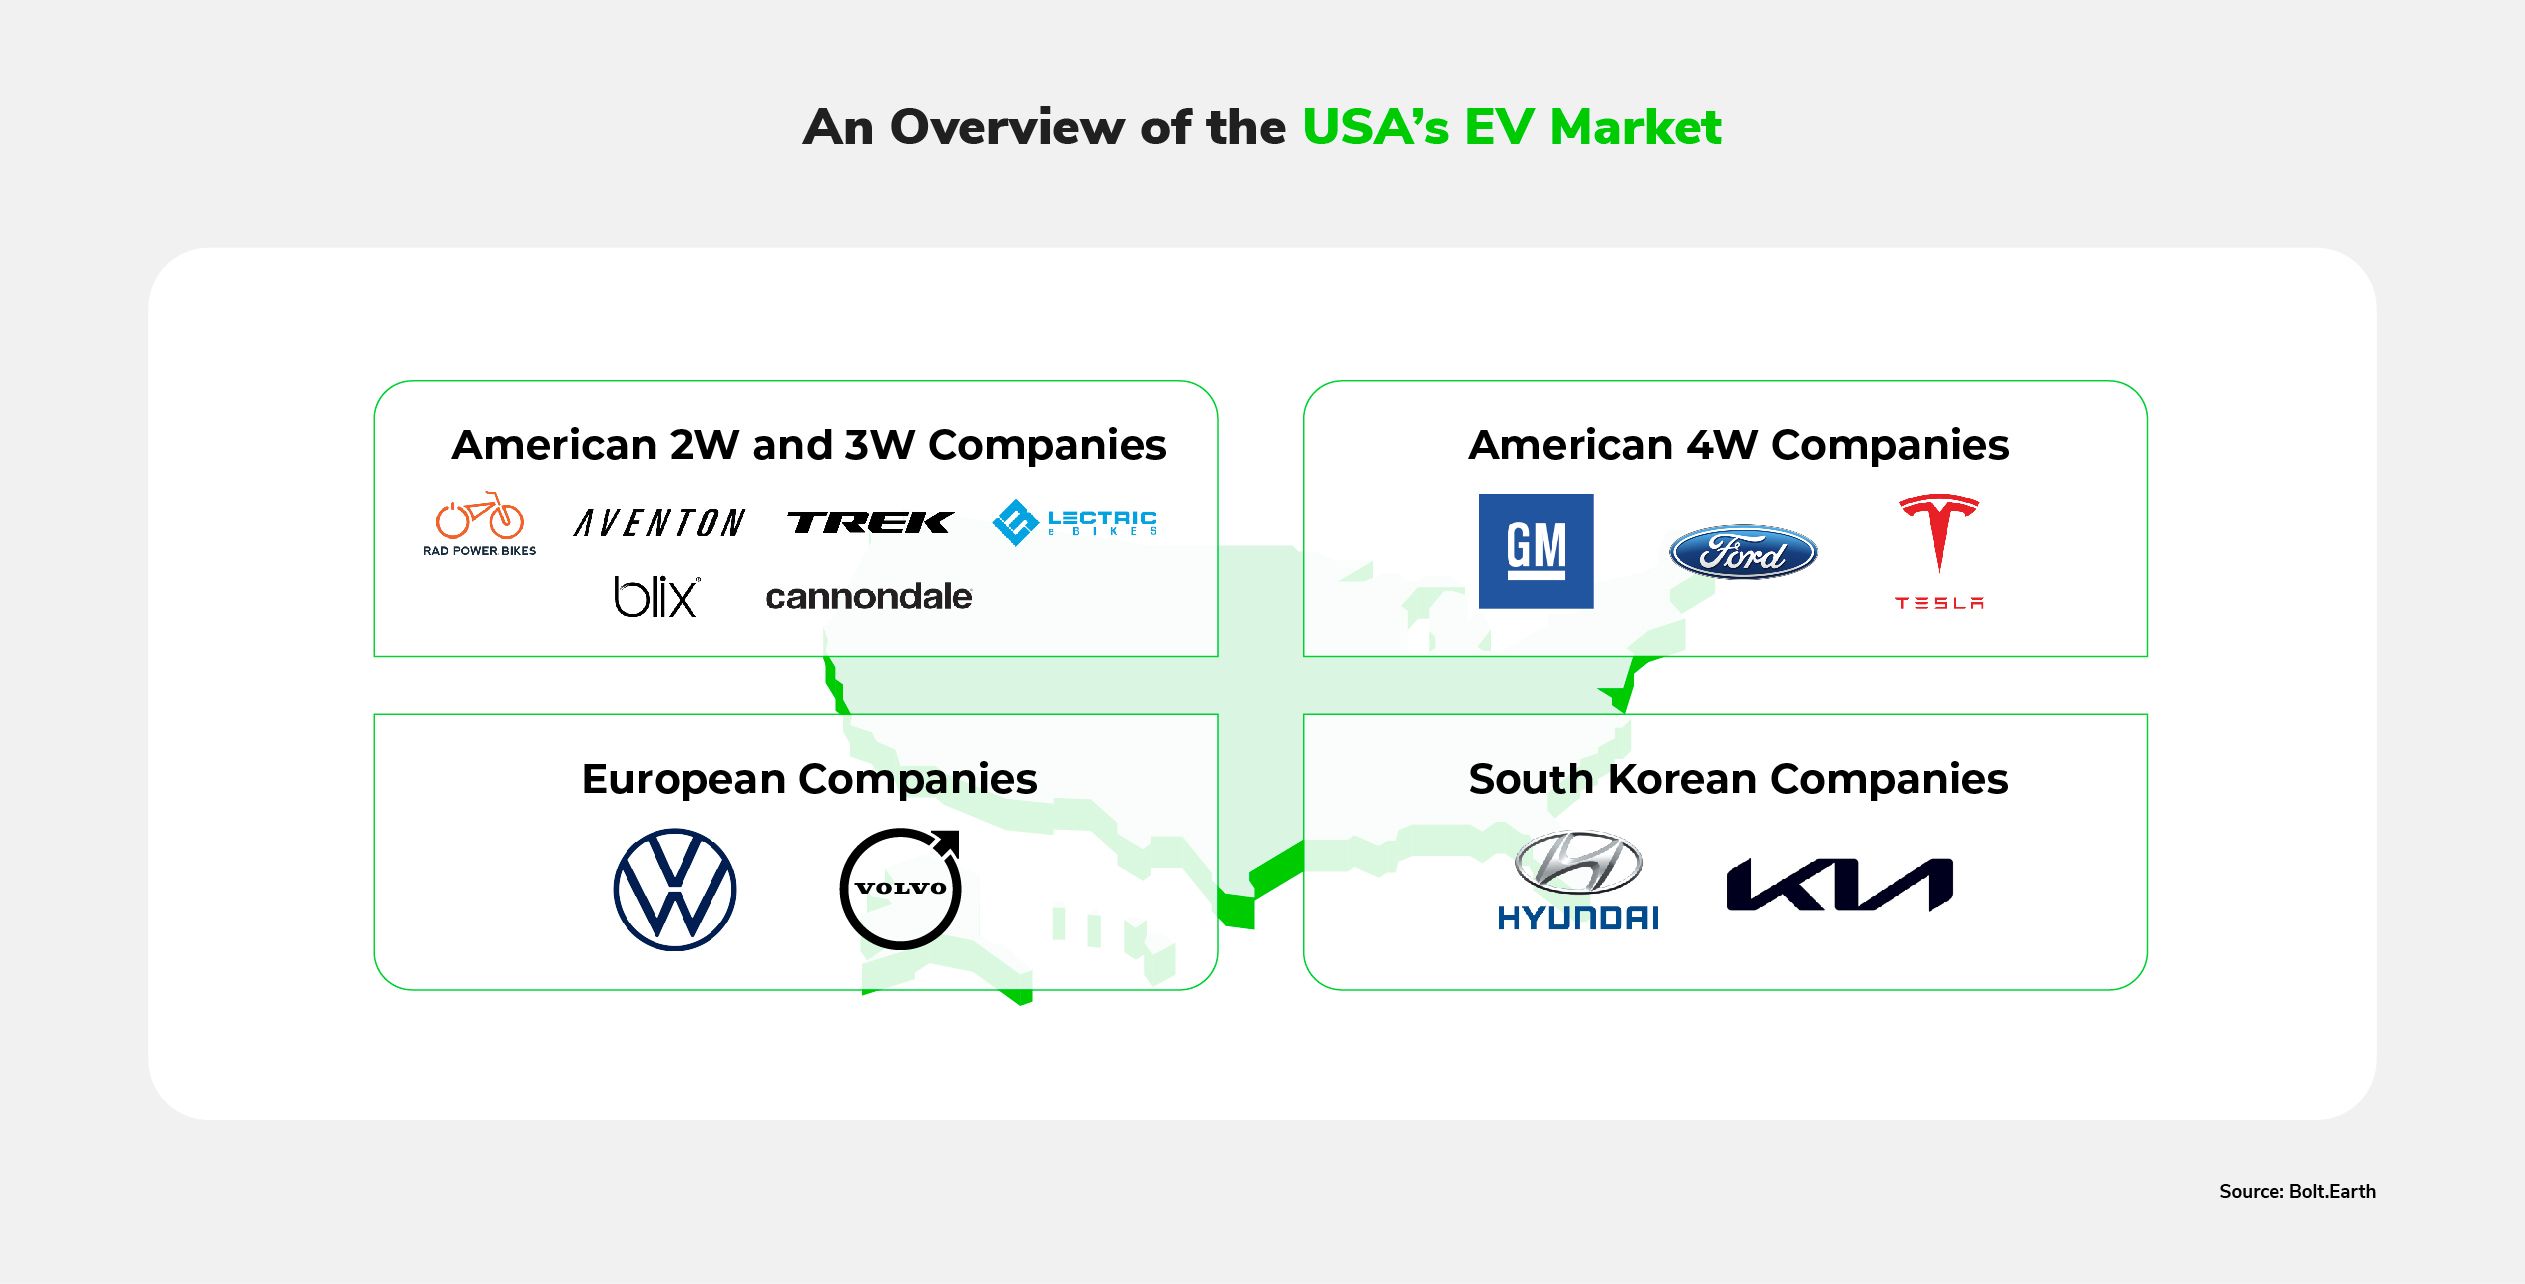 An infographic listing major market players in the USA's EV market, superimposed on a map of the USA